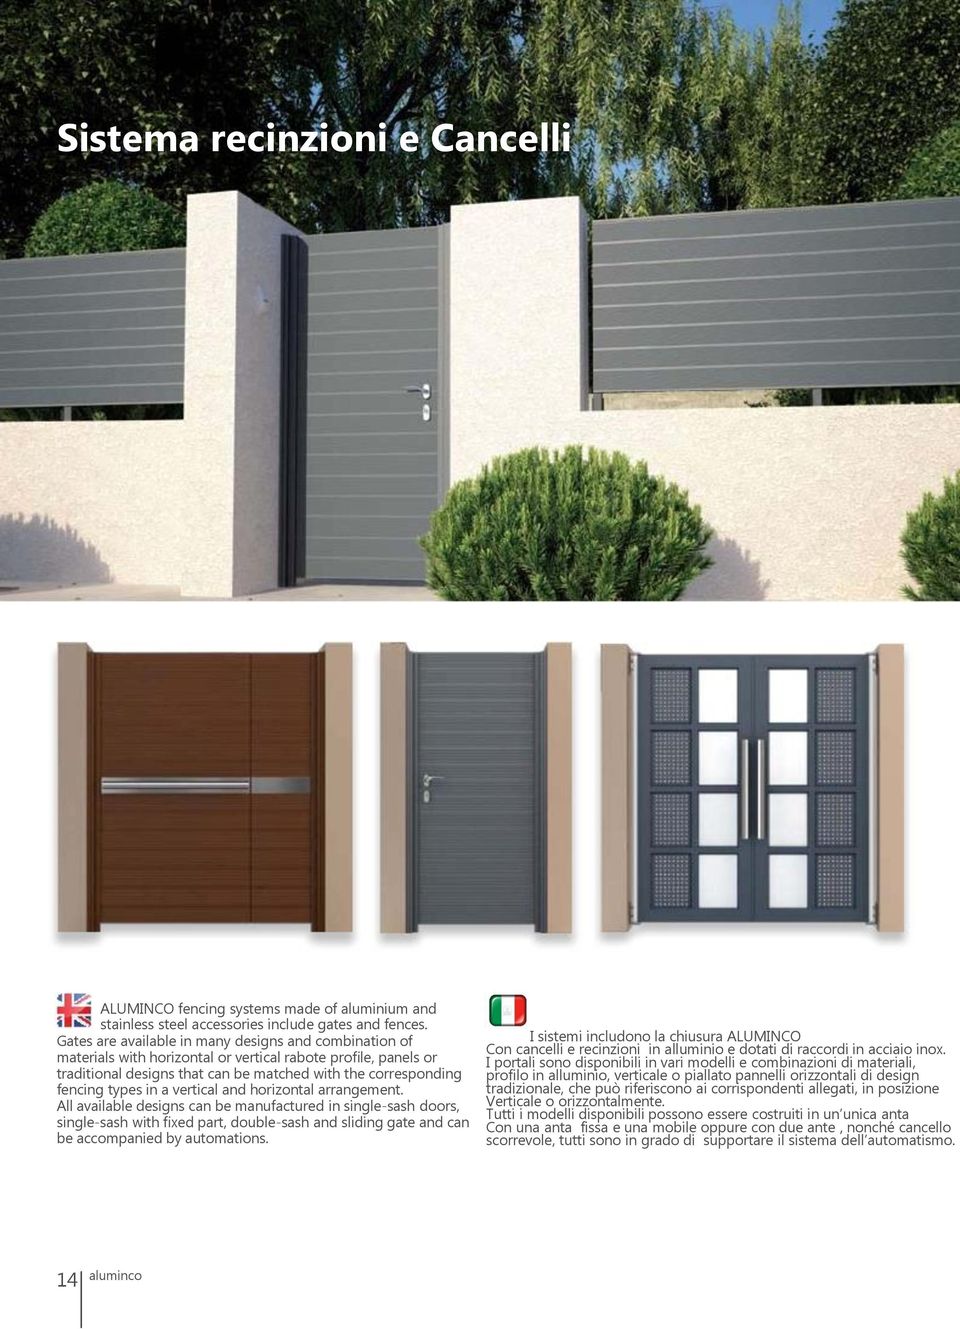 a vertical and horizontal arrangement. All available designs can be manufactured in single-sash doors, single-sash with fixed part, double-sash and sliding gate and can be accompanied by automations.